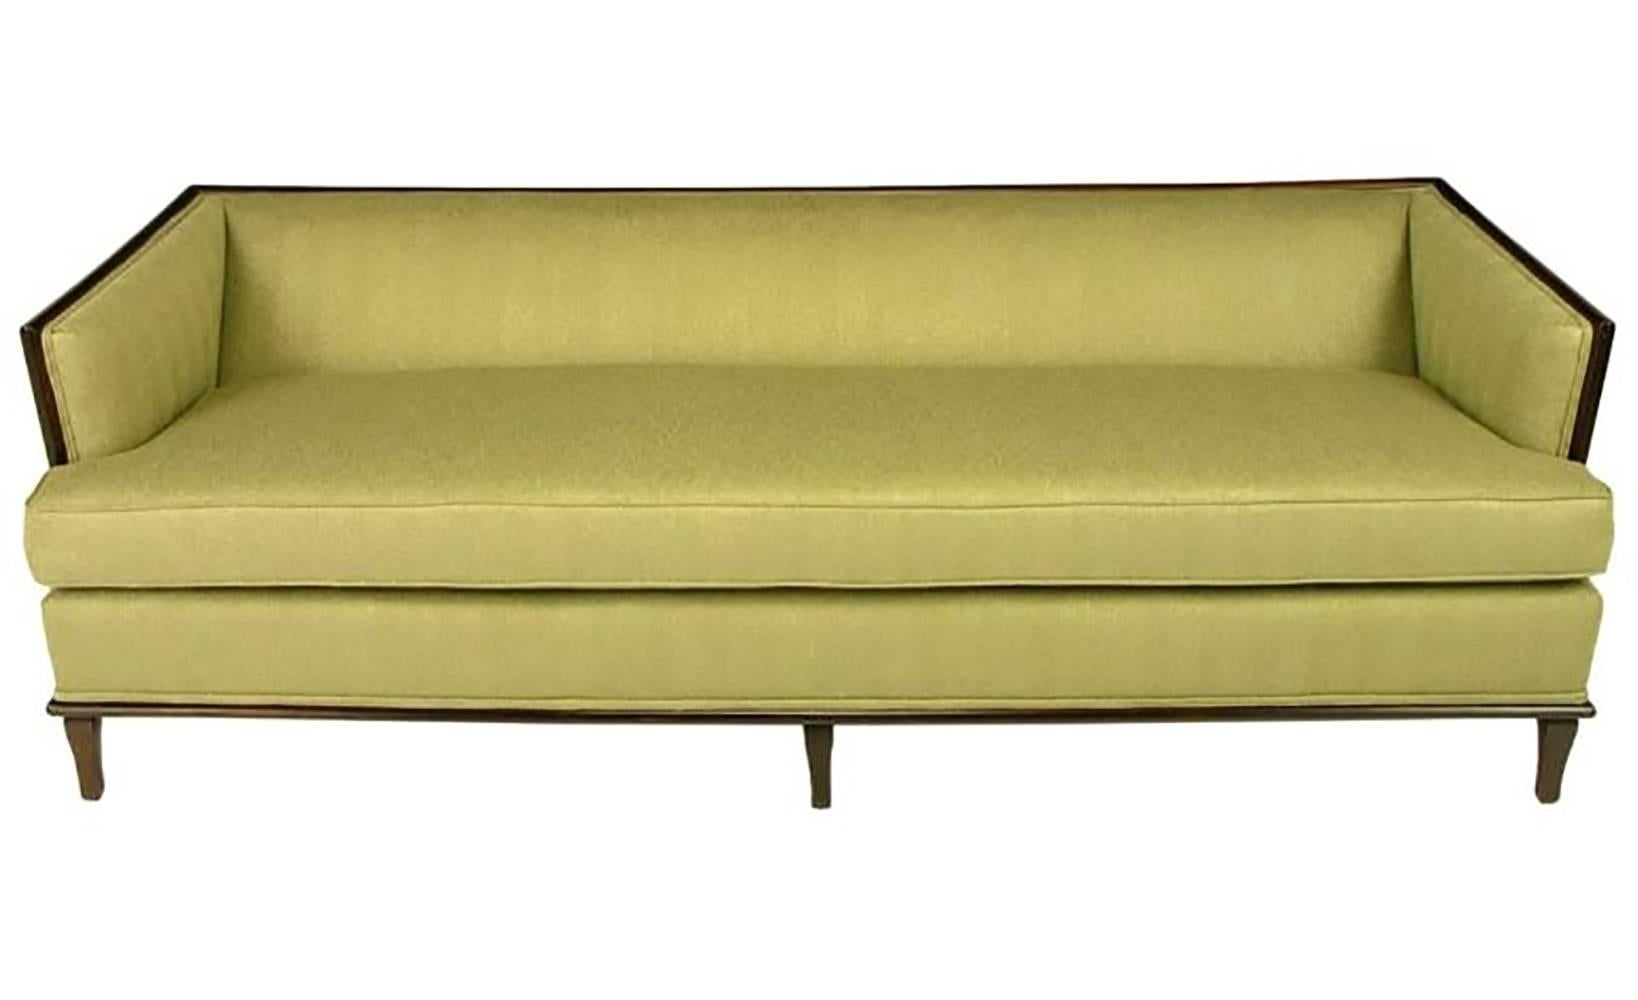 Elegant even arm sofa with exposed mahogany frame with three front legs and saber back legs. Completely restored with new single seat cushion, tight arm and back cushion. Subtly textured sage herringbone silk and linen fabric.